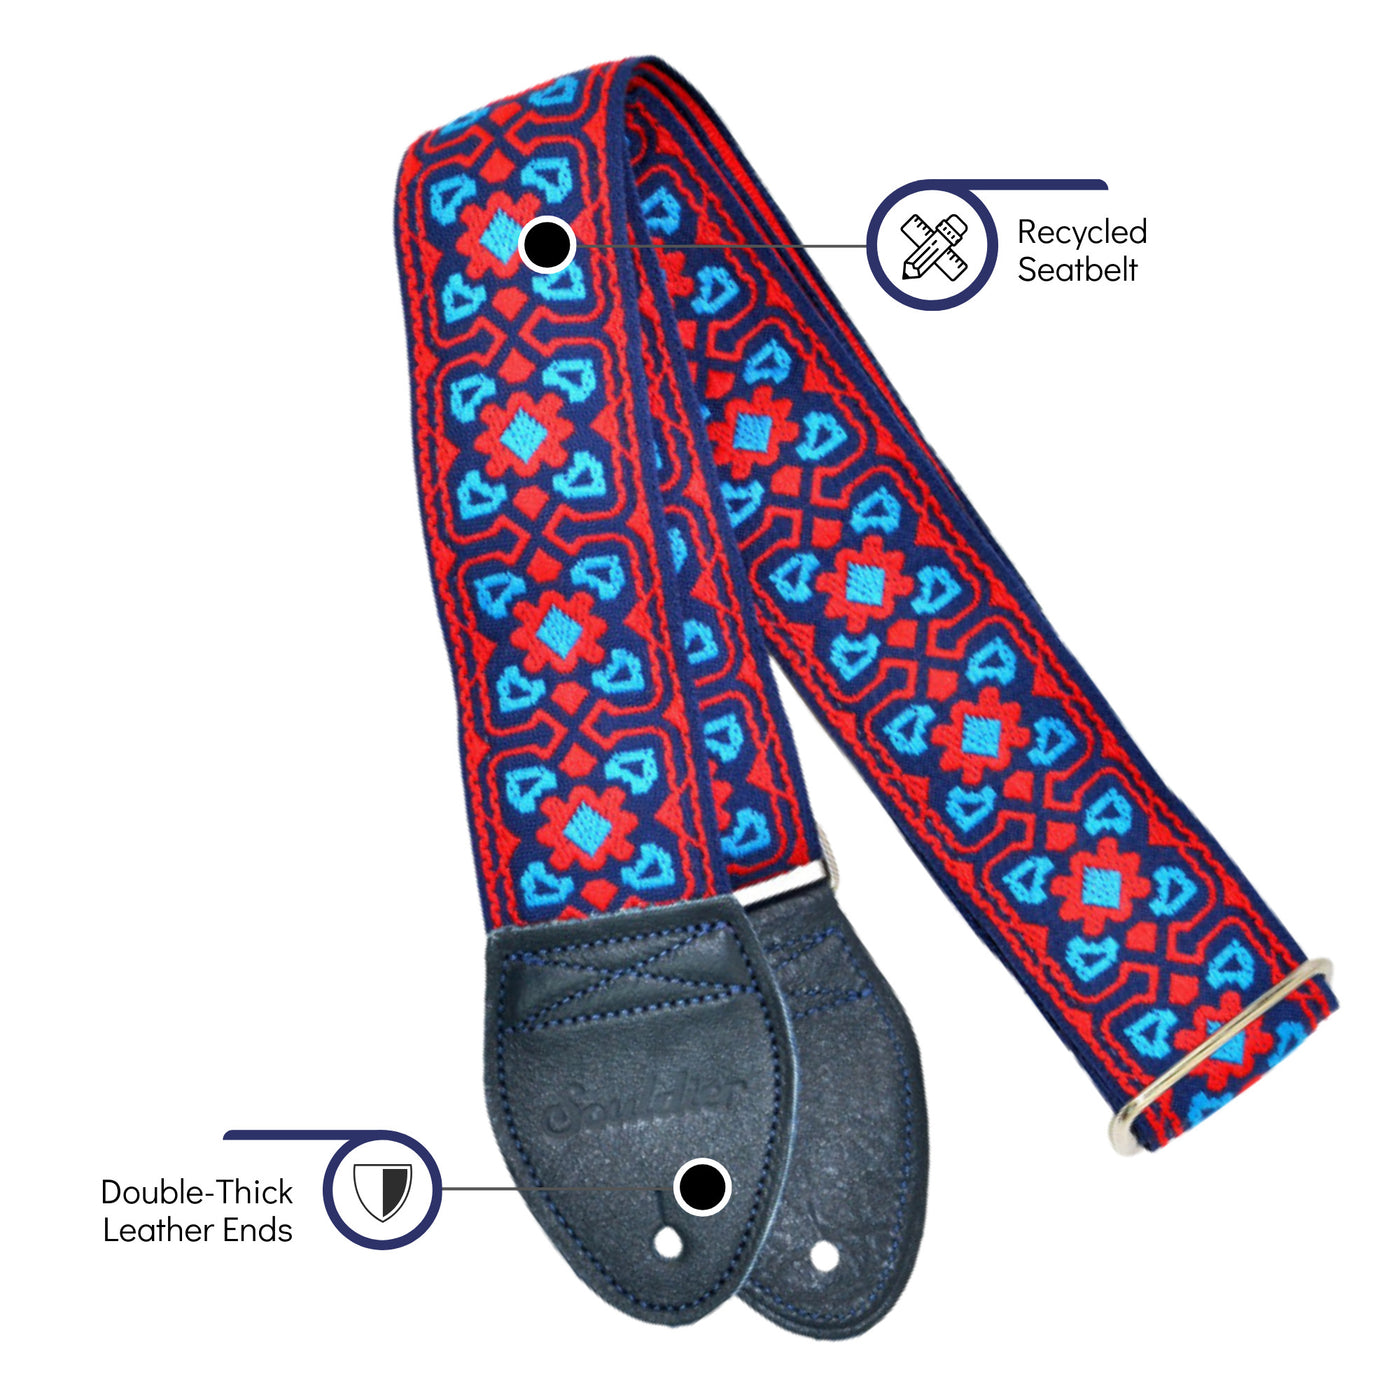 Souldier GS1295NV02NV - Handmade Seatbelt Guitar Strap for Bass, Electric or Acoustic Guitar, 2 Inches Wide and Adjustable Length from 30" to 63"  Made in the USA, Fillmore, Navy and Red